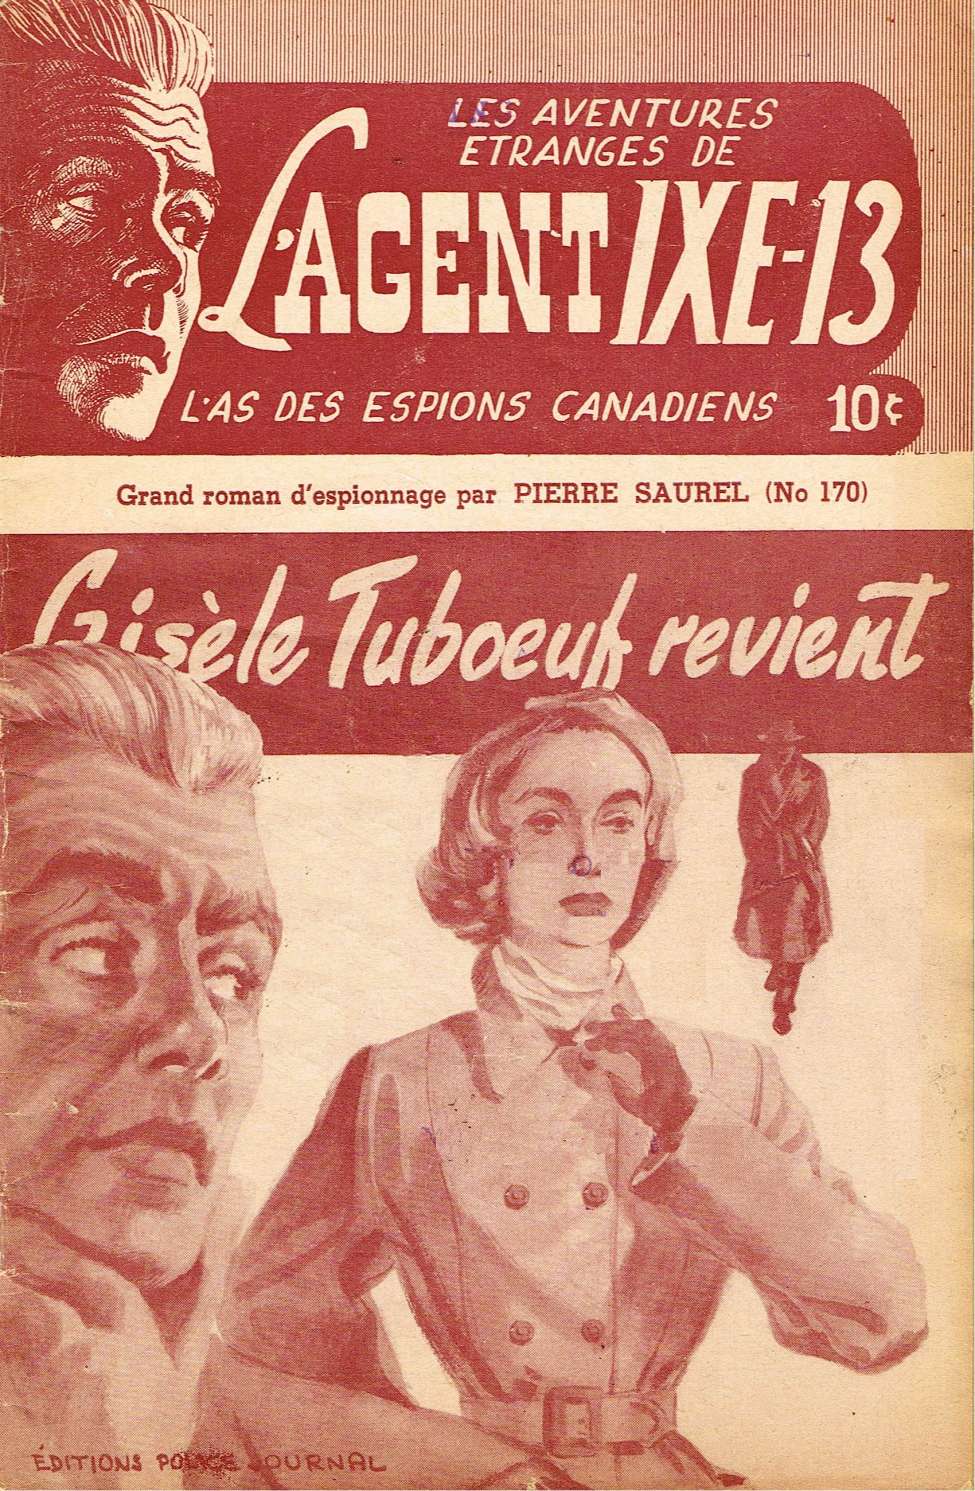 Book Cover For L'Agent IXE-13 v2 170 - Gisèle Tuboeuf revient